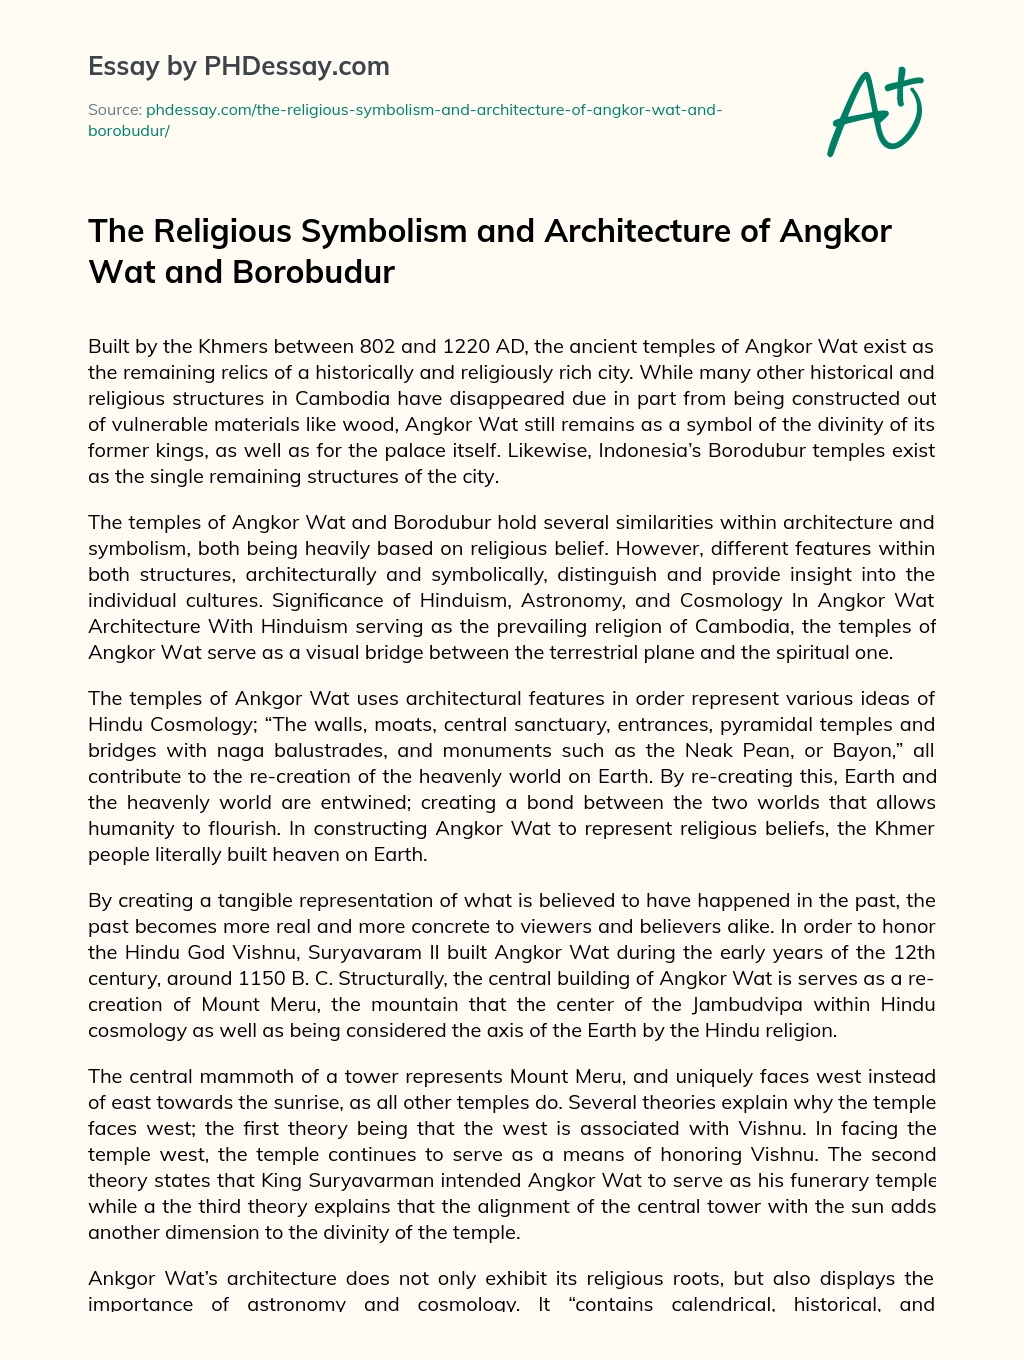 The Religious Symbolism and Architecture of Angkor Wat and Borobudur essay